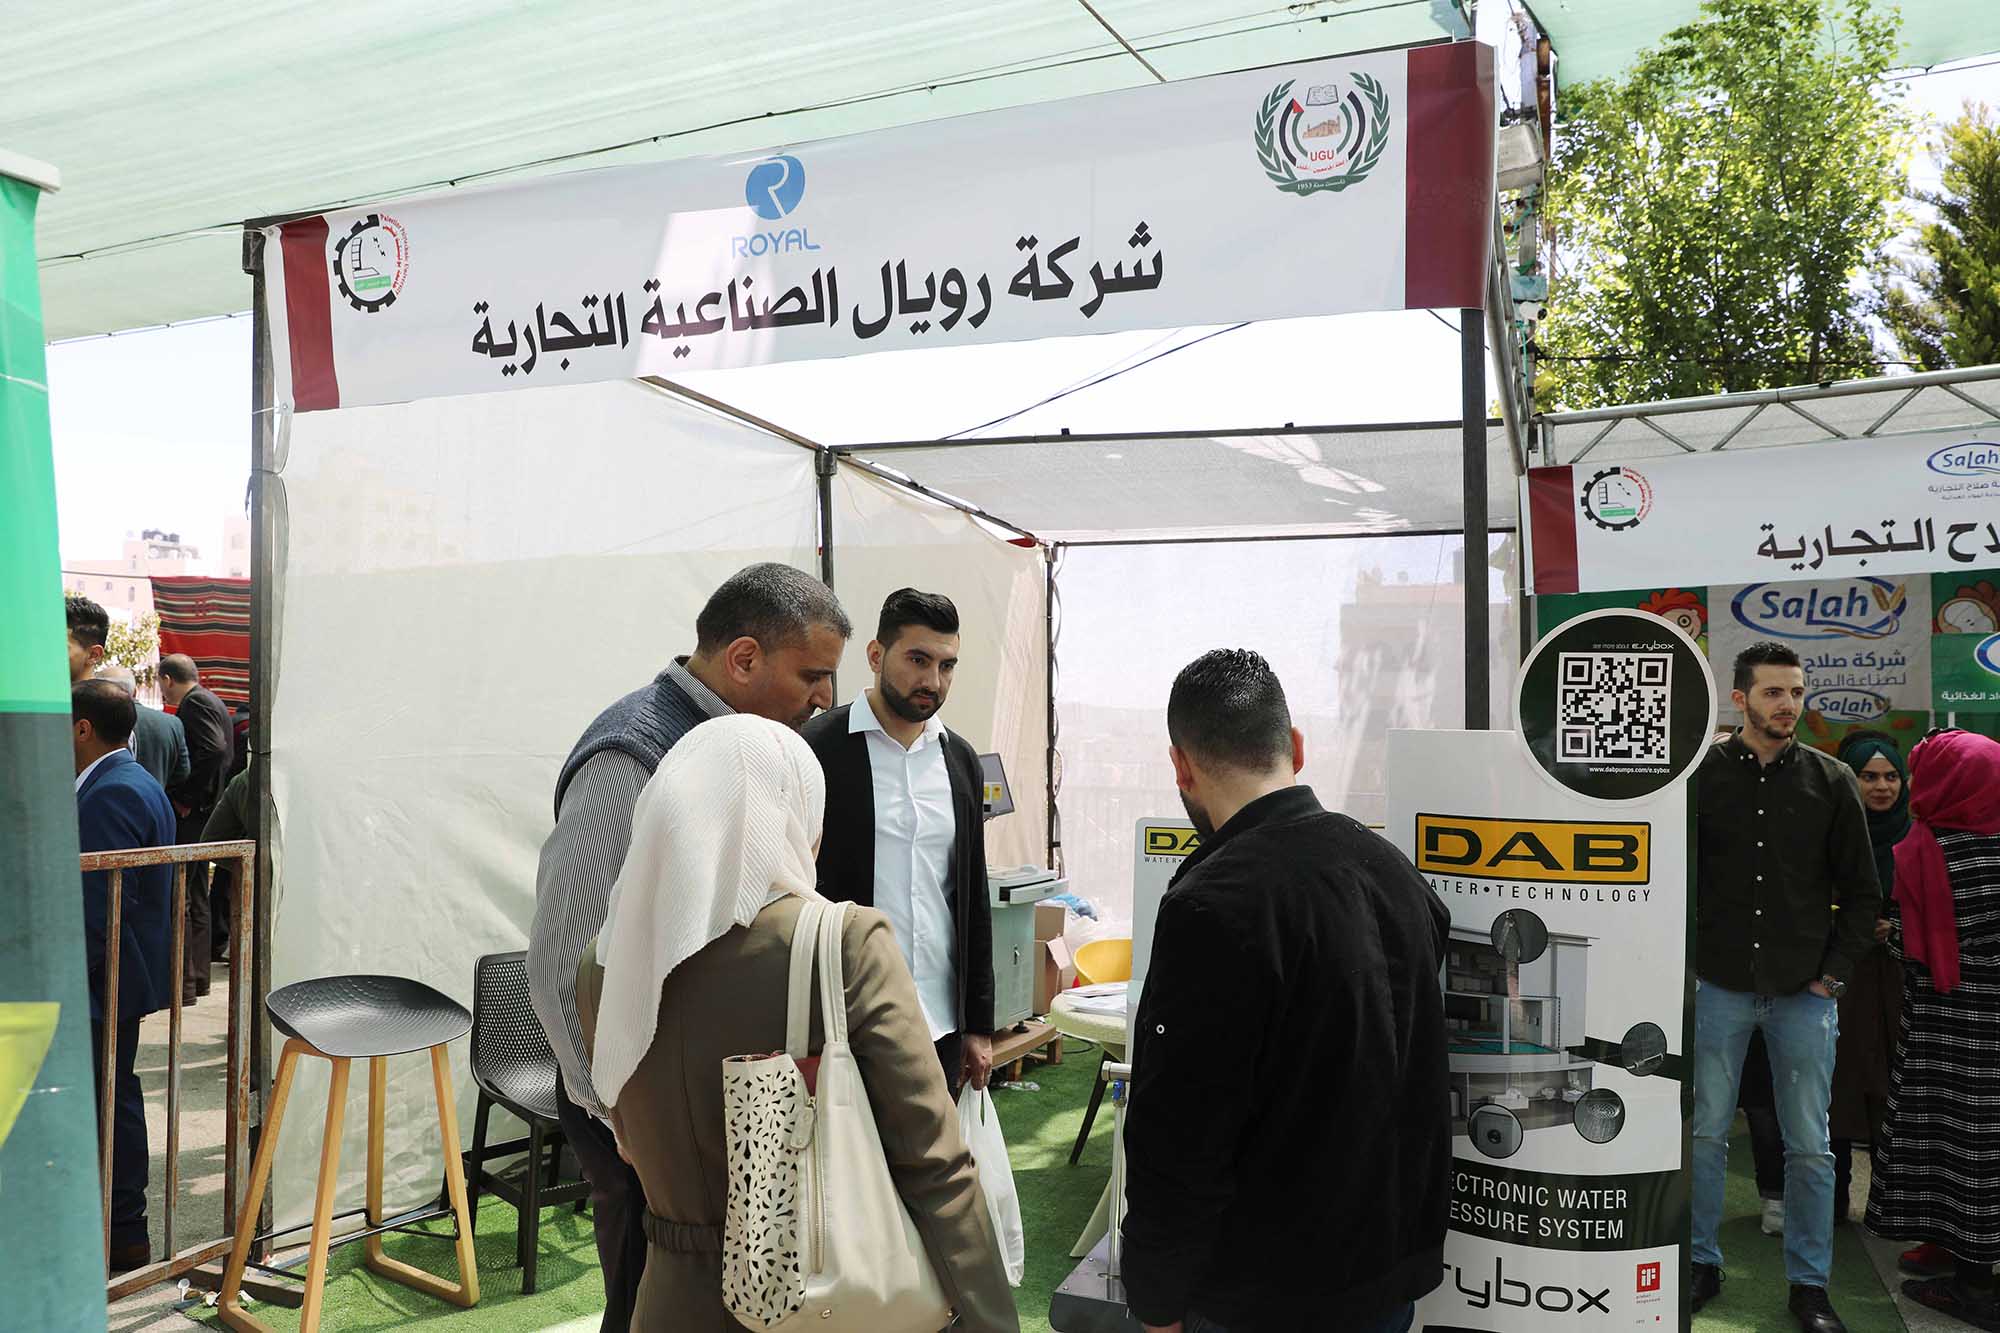 Royal participates in the Polytechnic Day event